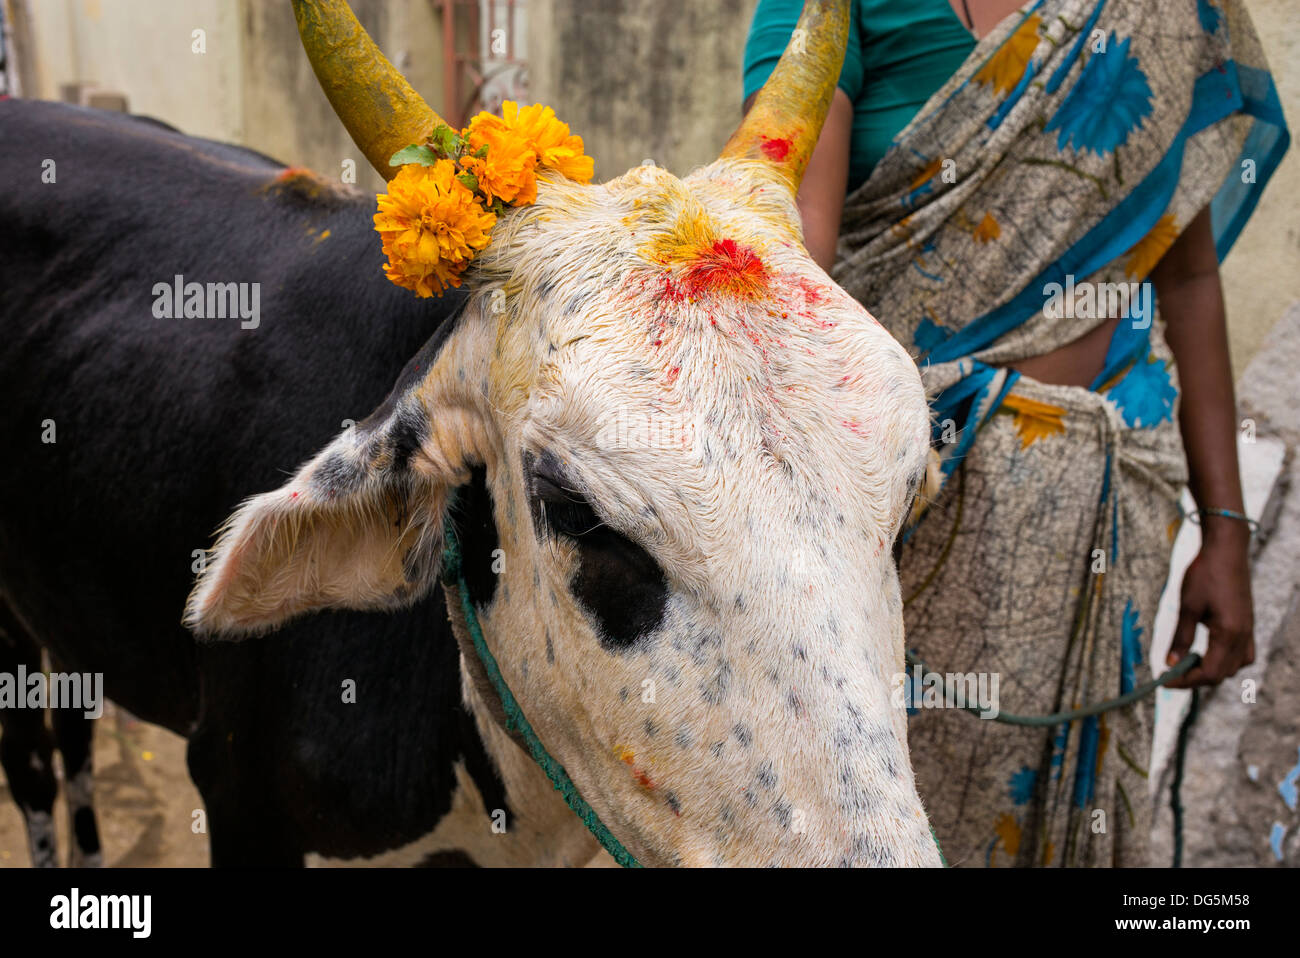 Indian cow adorned in kum kum and turmeric powder at festival time in a rural Indian village. Andhra Pradesh, India Stock Photo